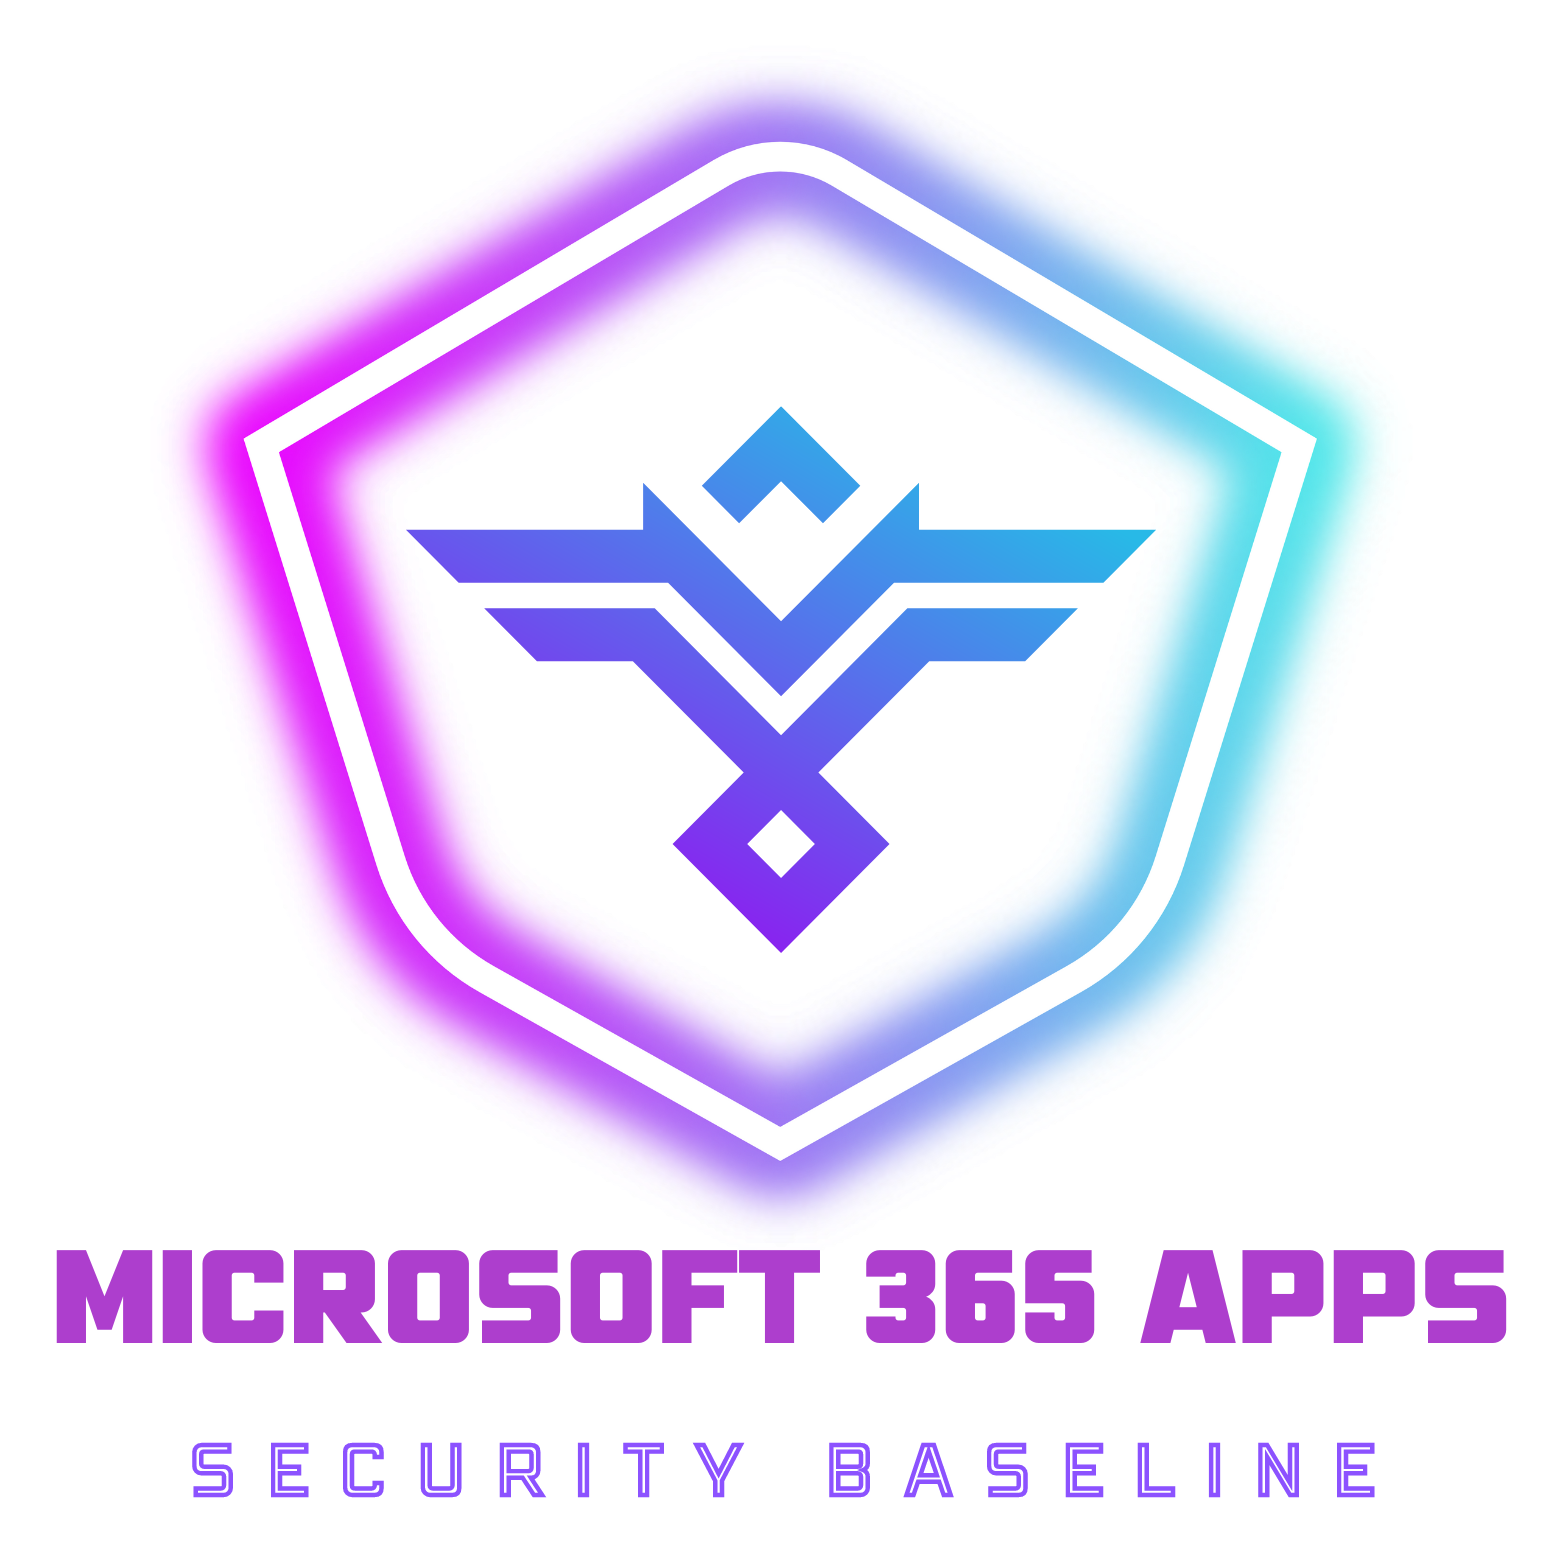 Microsoft 365 Apps Security Baselines - Harden Windows Security GitHub repository